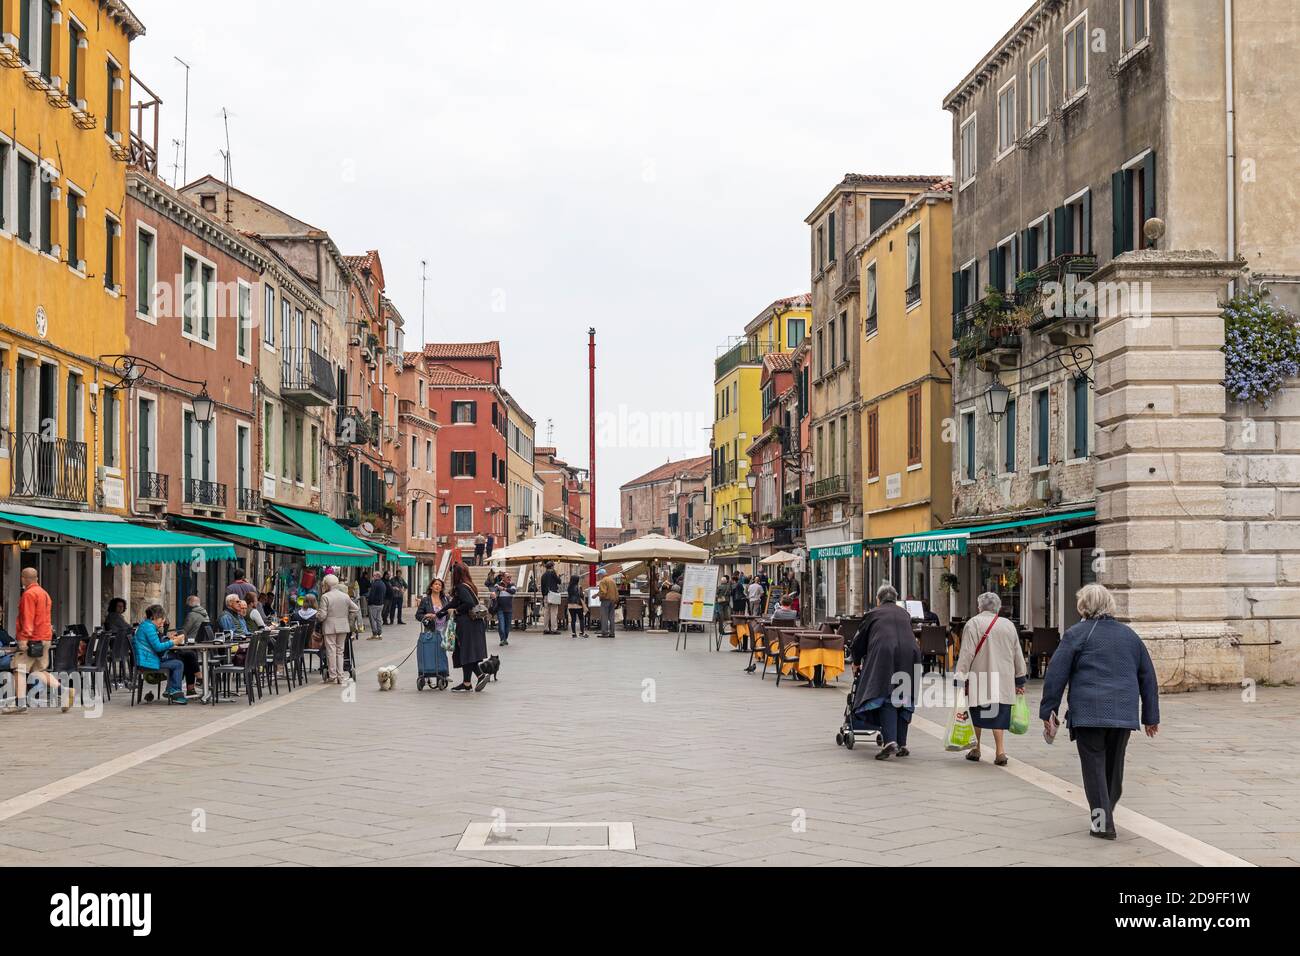 The wide street of via Giuseppe Garibaldi with its cafes, restaurants and shops. The Castello region of Venice, Italy. Taken during Covid-19 pandemic. Stock Photo